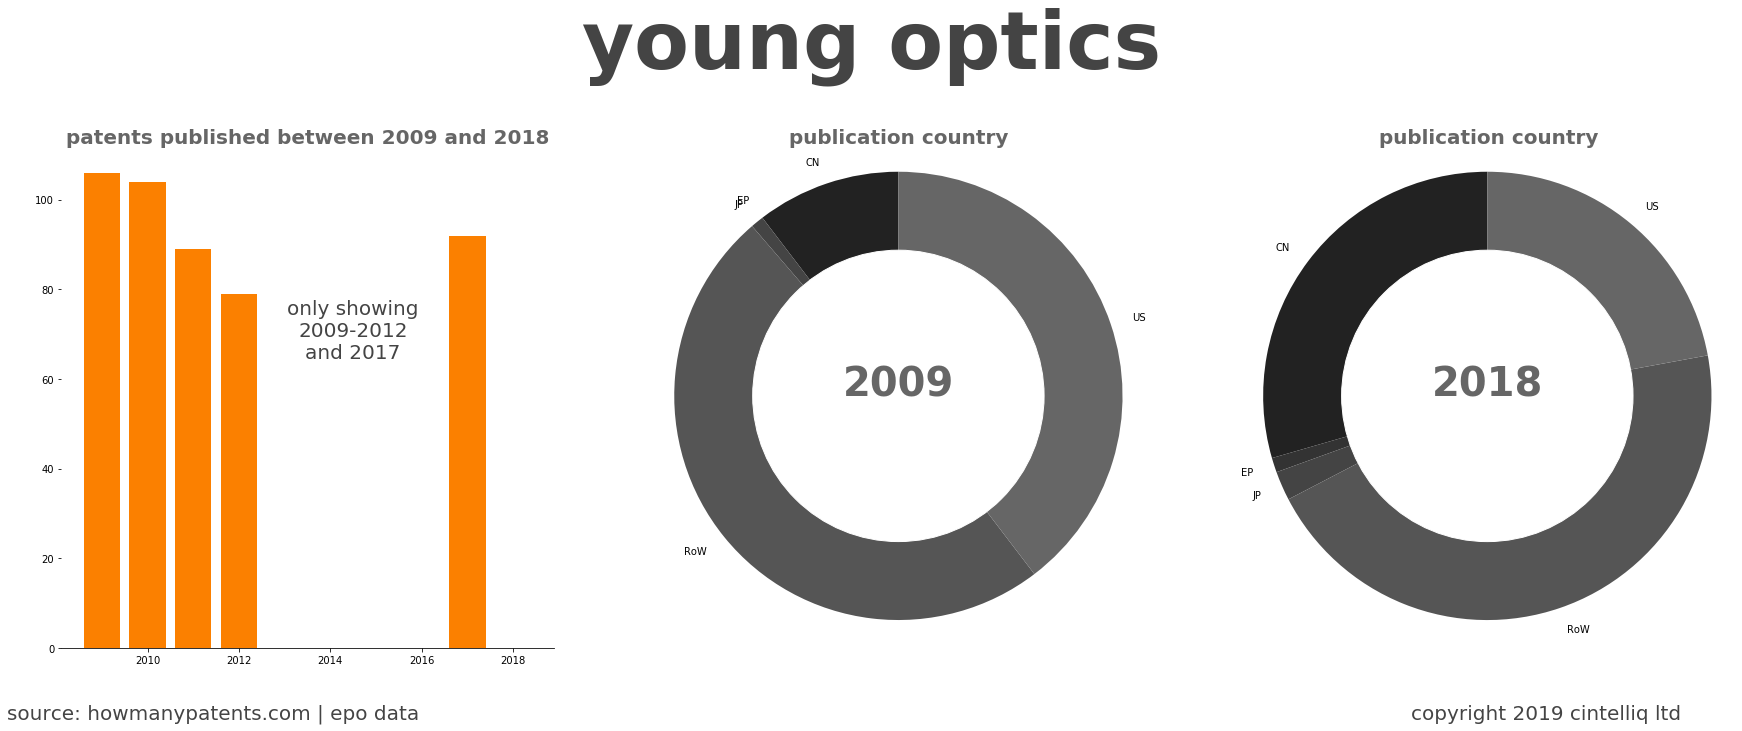 summary of patents for Young Optics